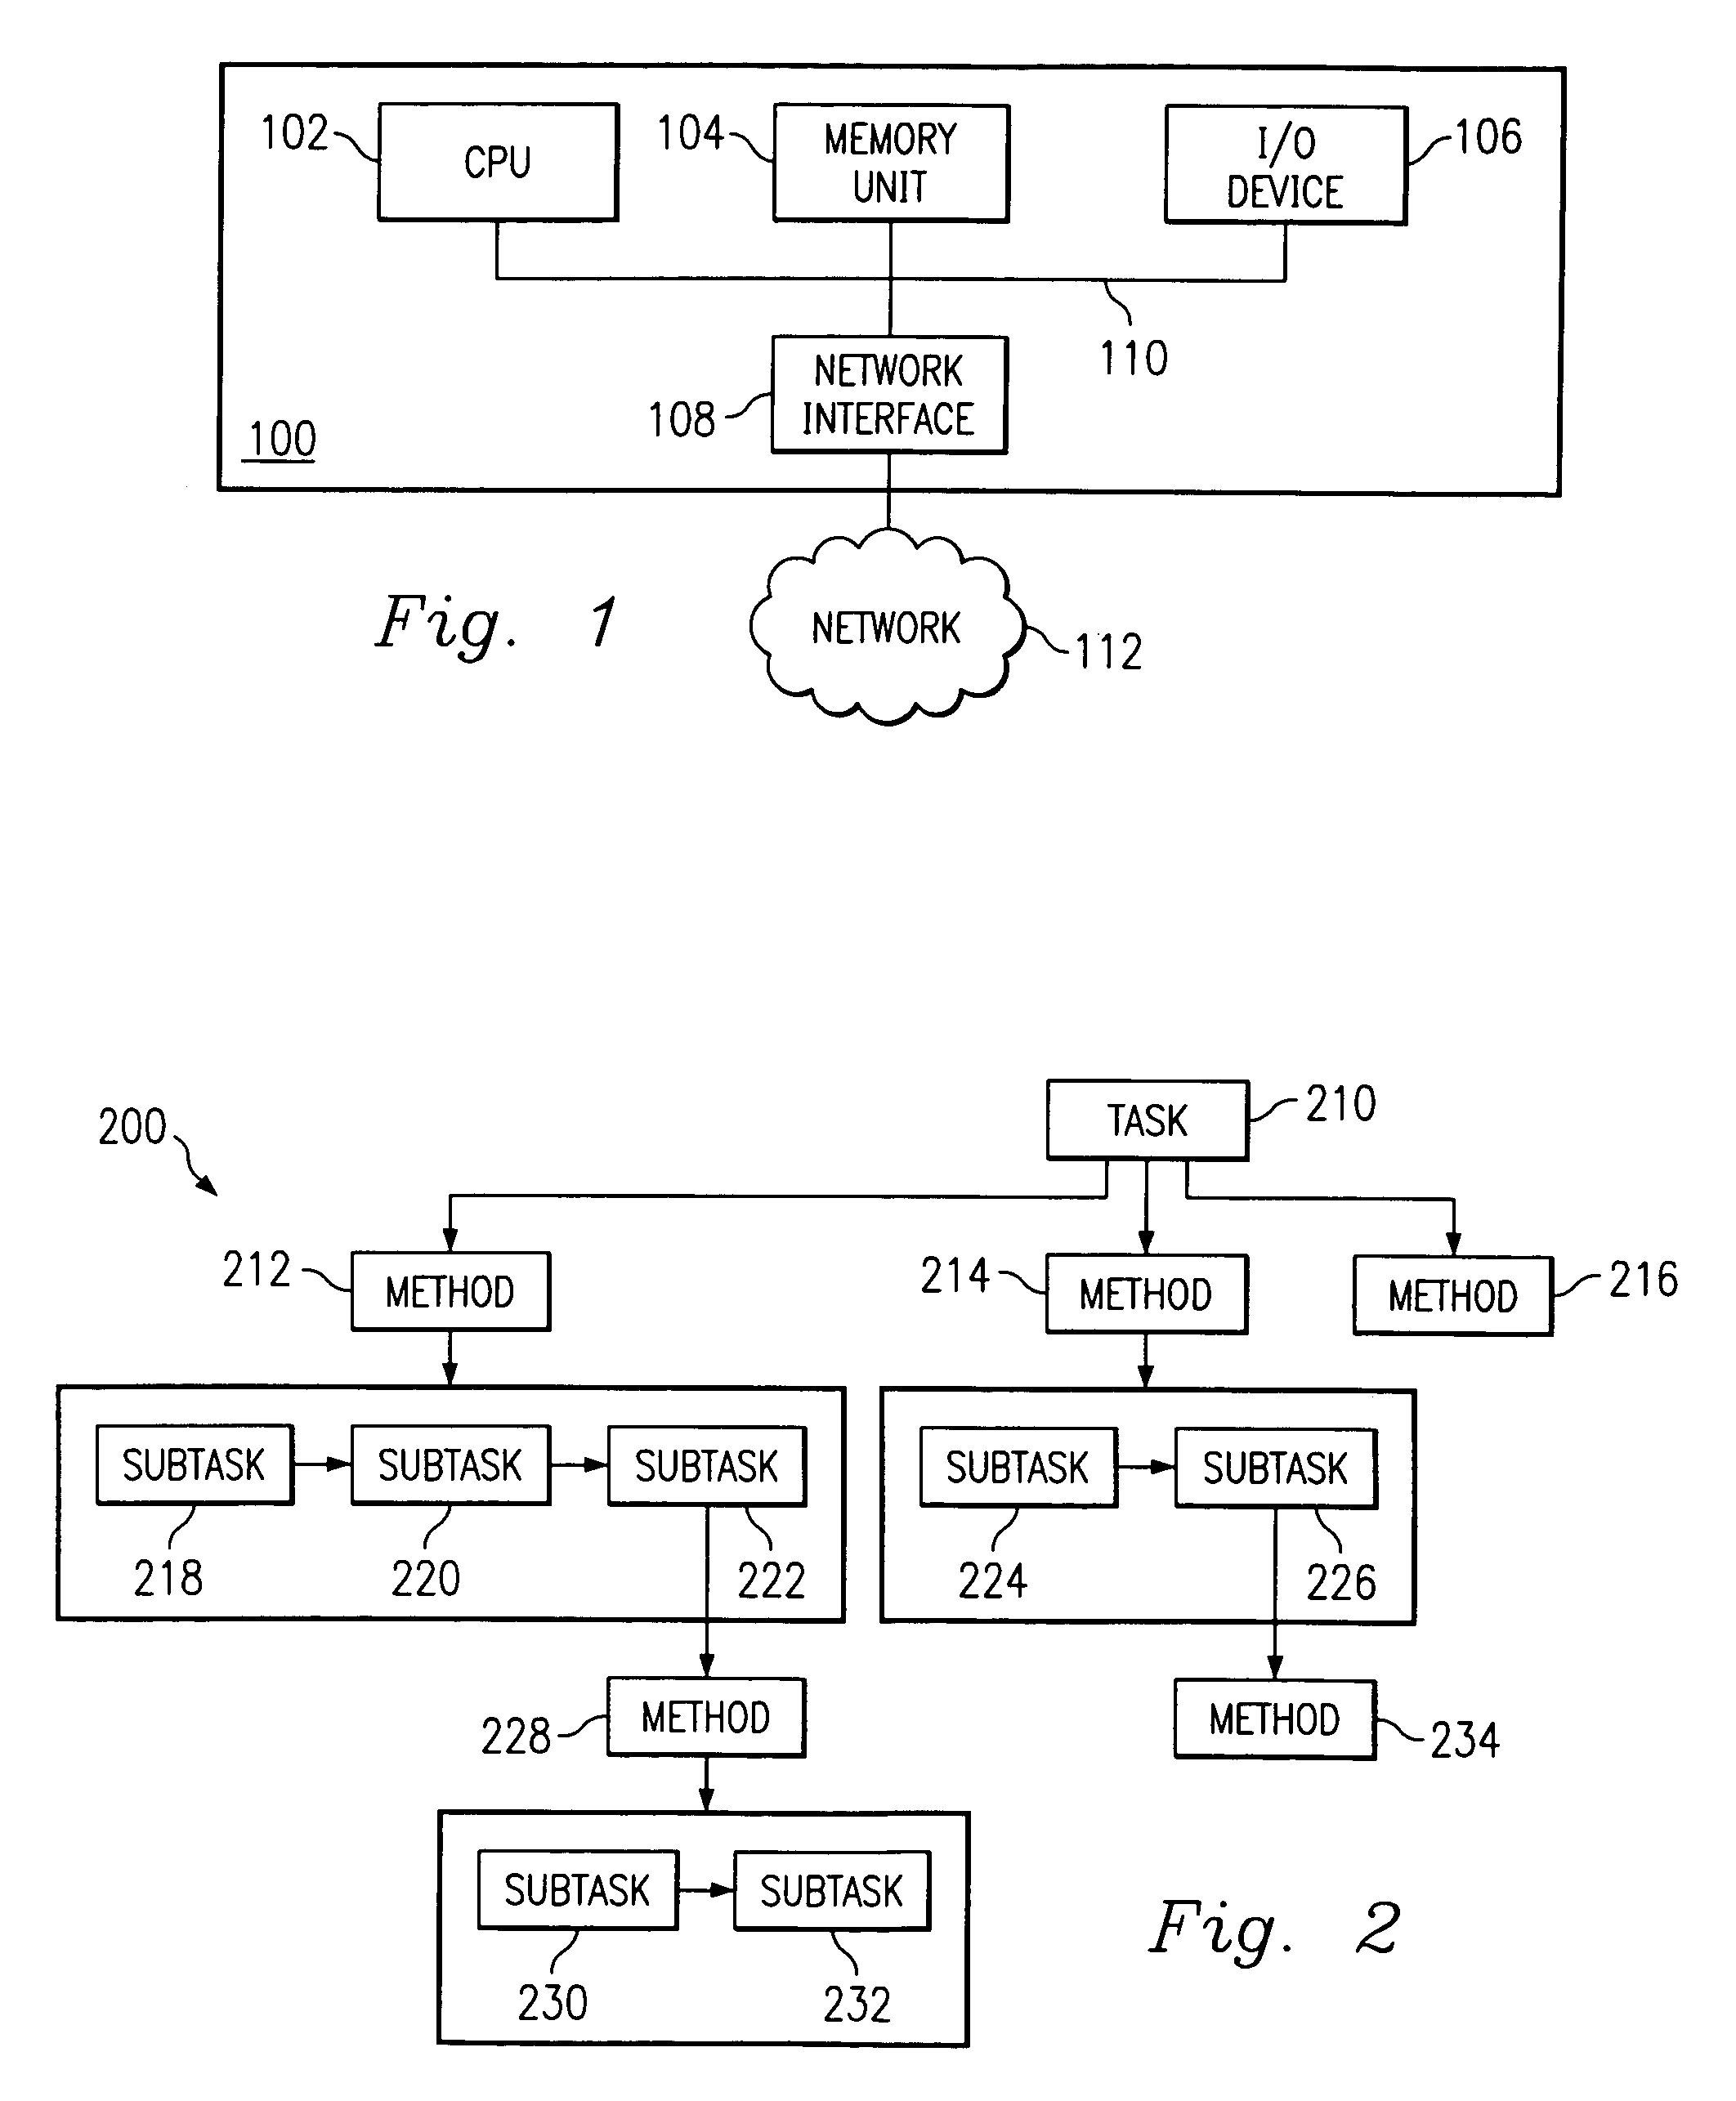 System and method for collecting and representing knowledge using task-method-knowledge with structure-behavior-function in a computer system